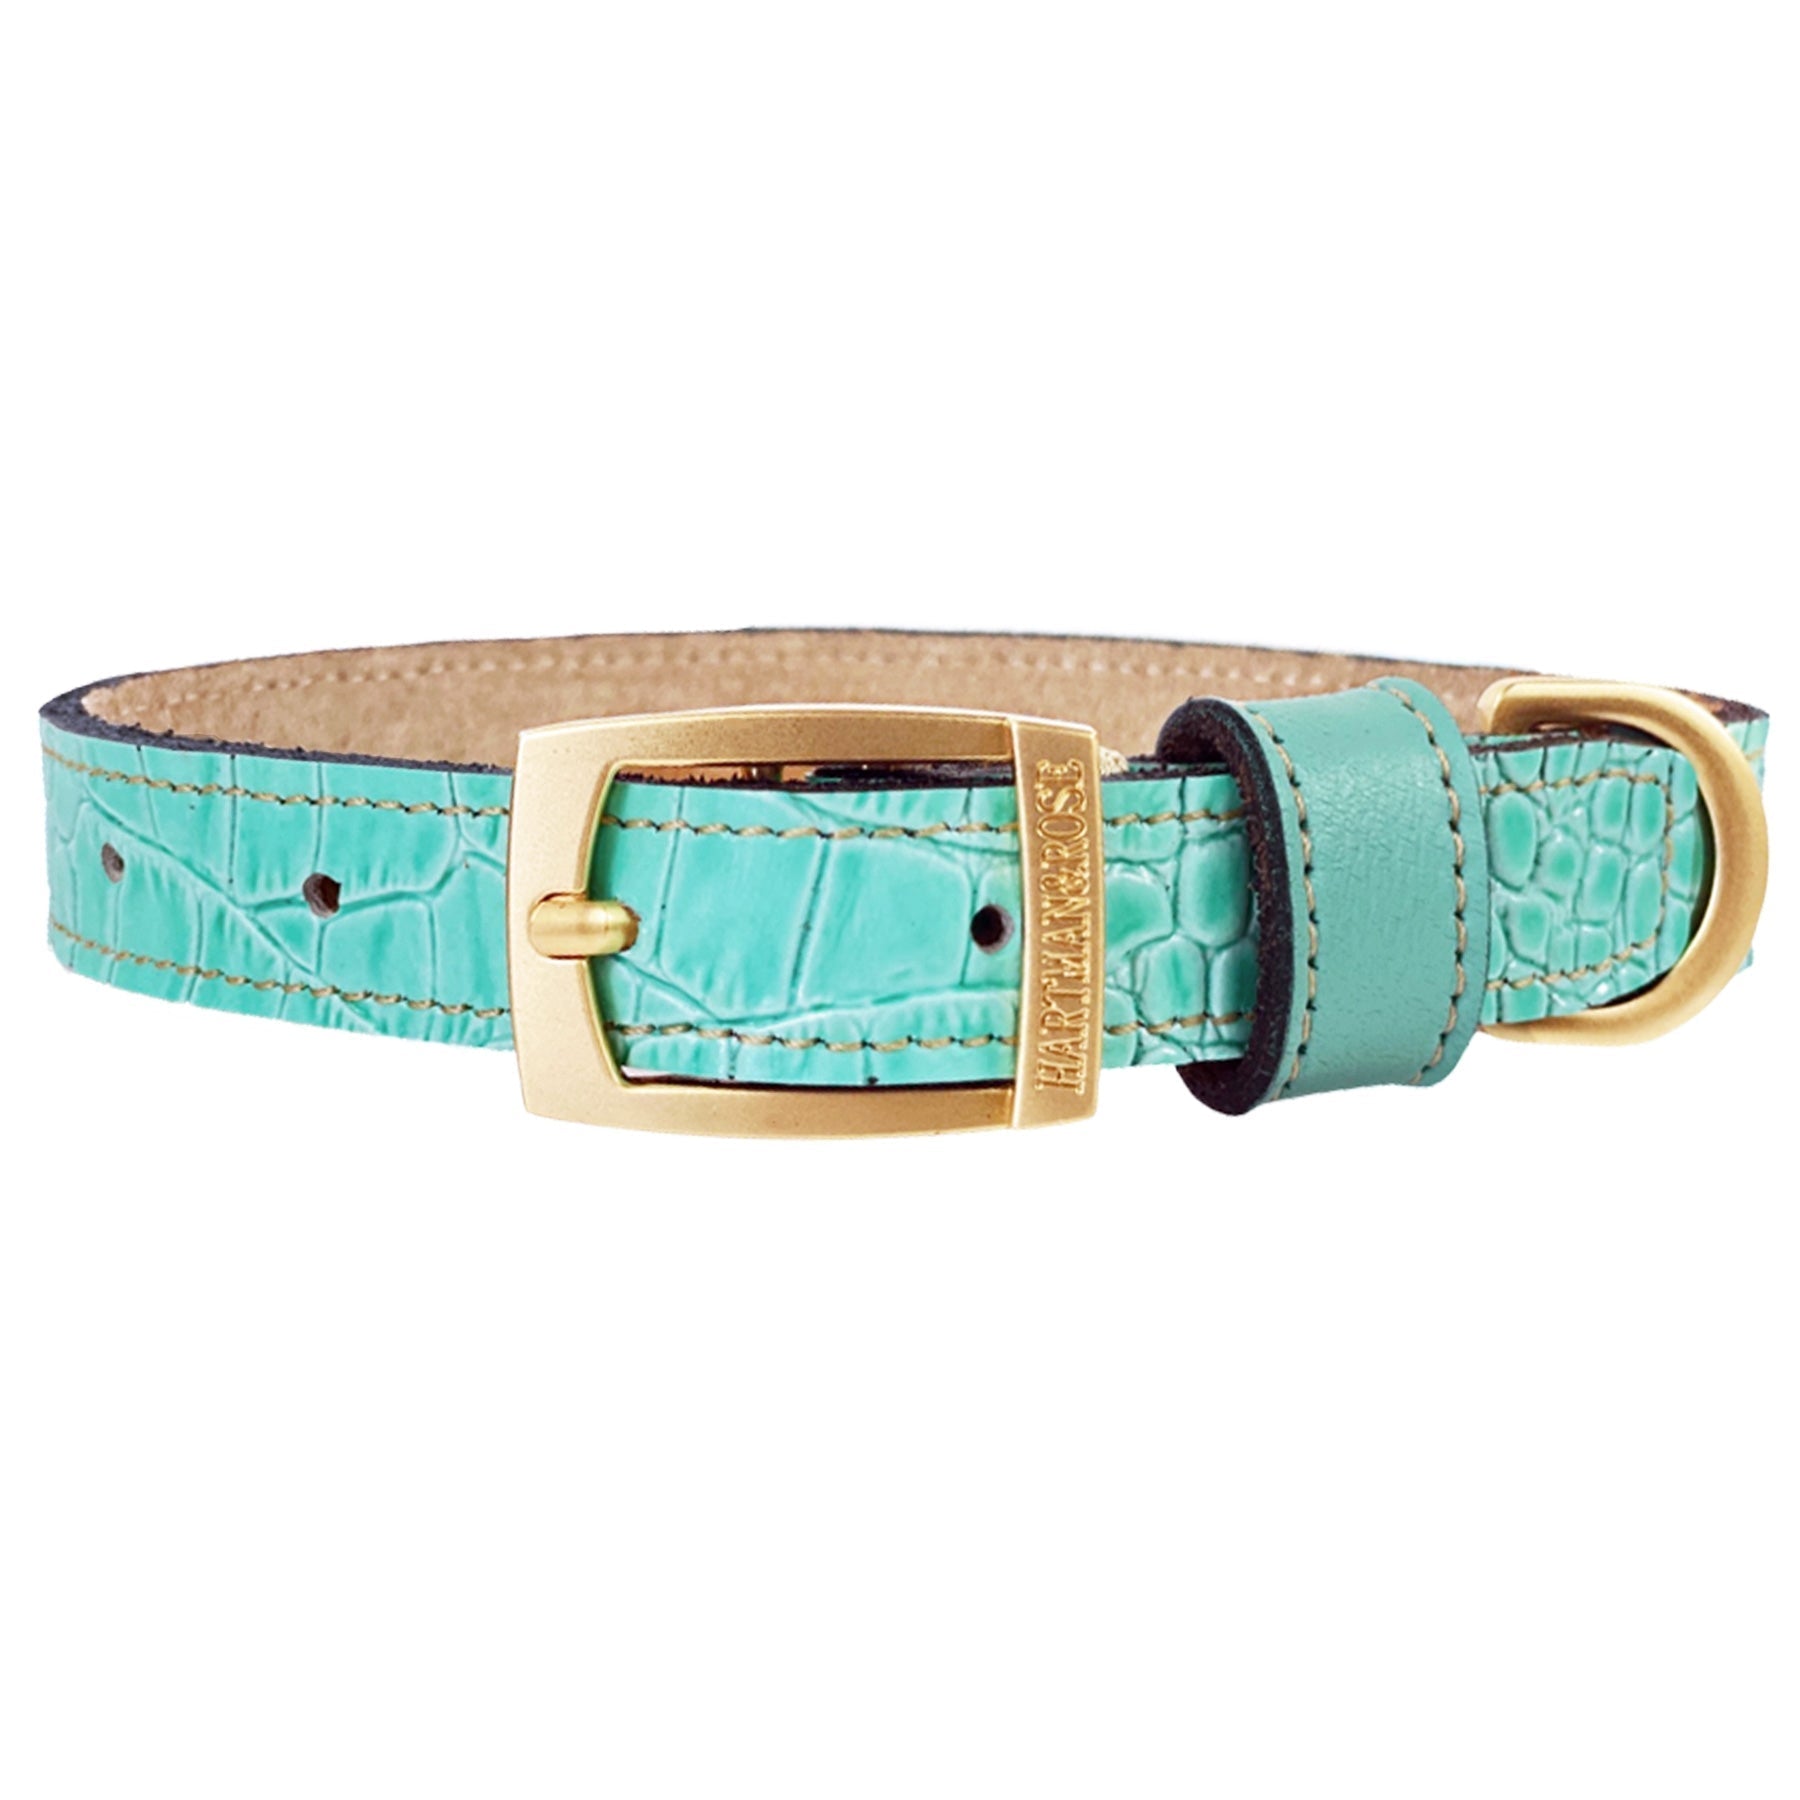 Cayman Collar in Turquoise